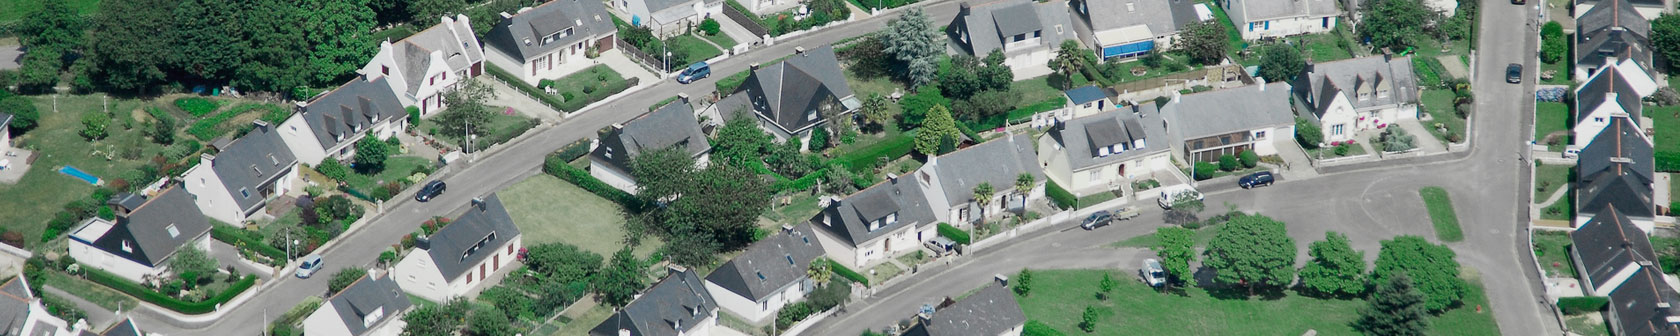 A residential area from above